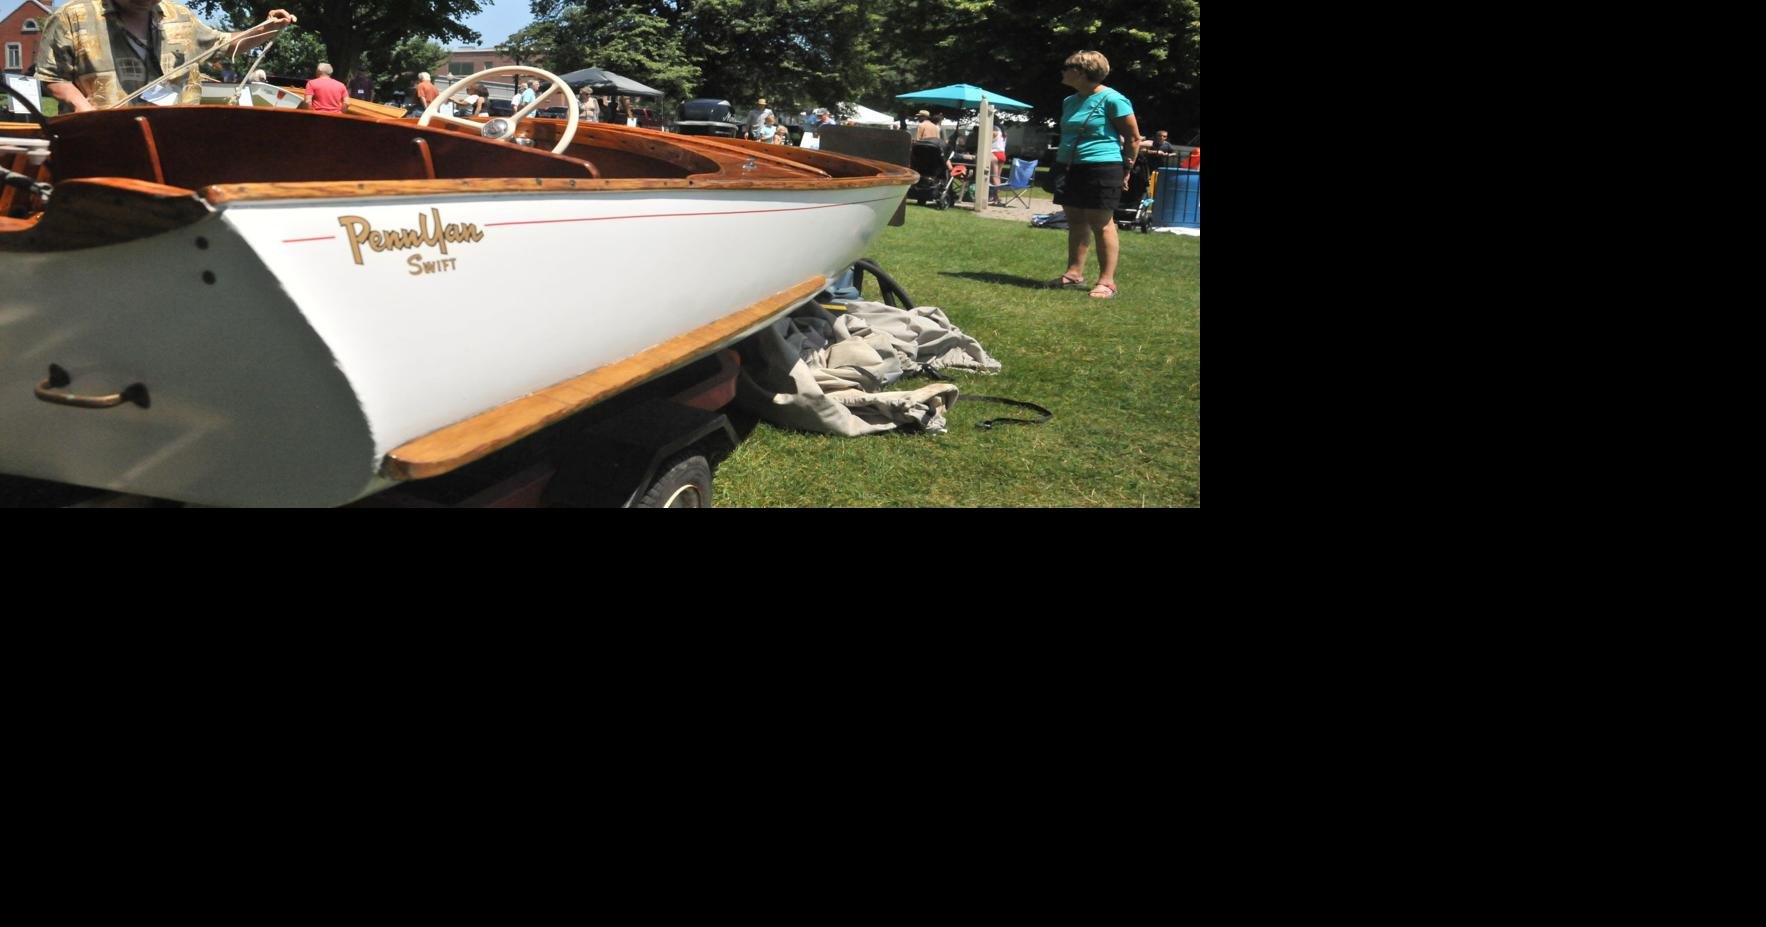 Skaneateles boat show draws boaters from around the country